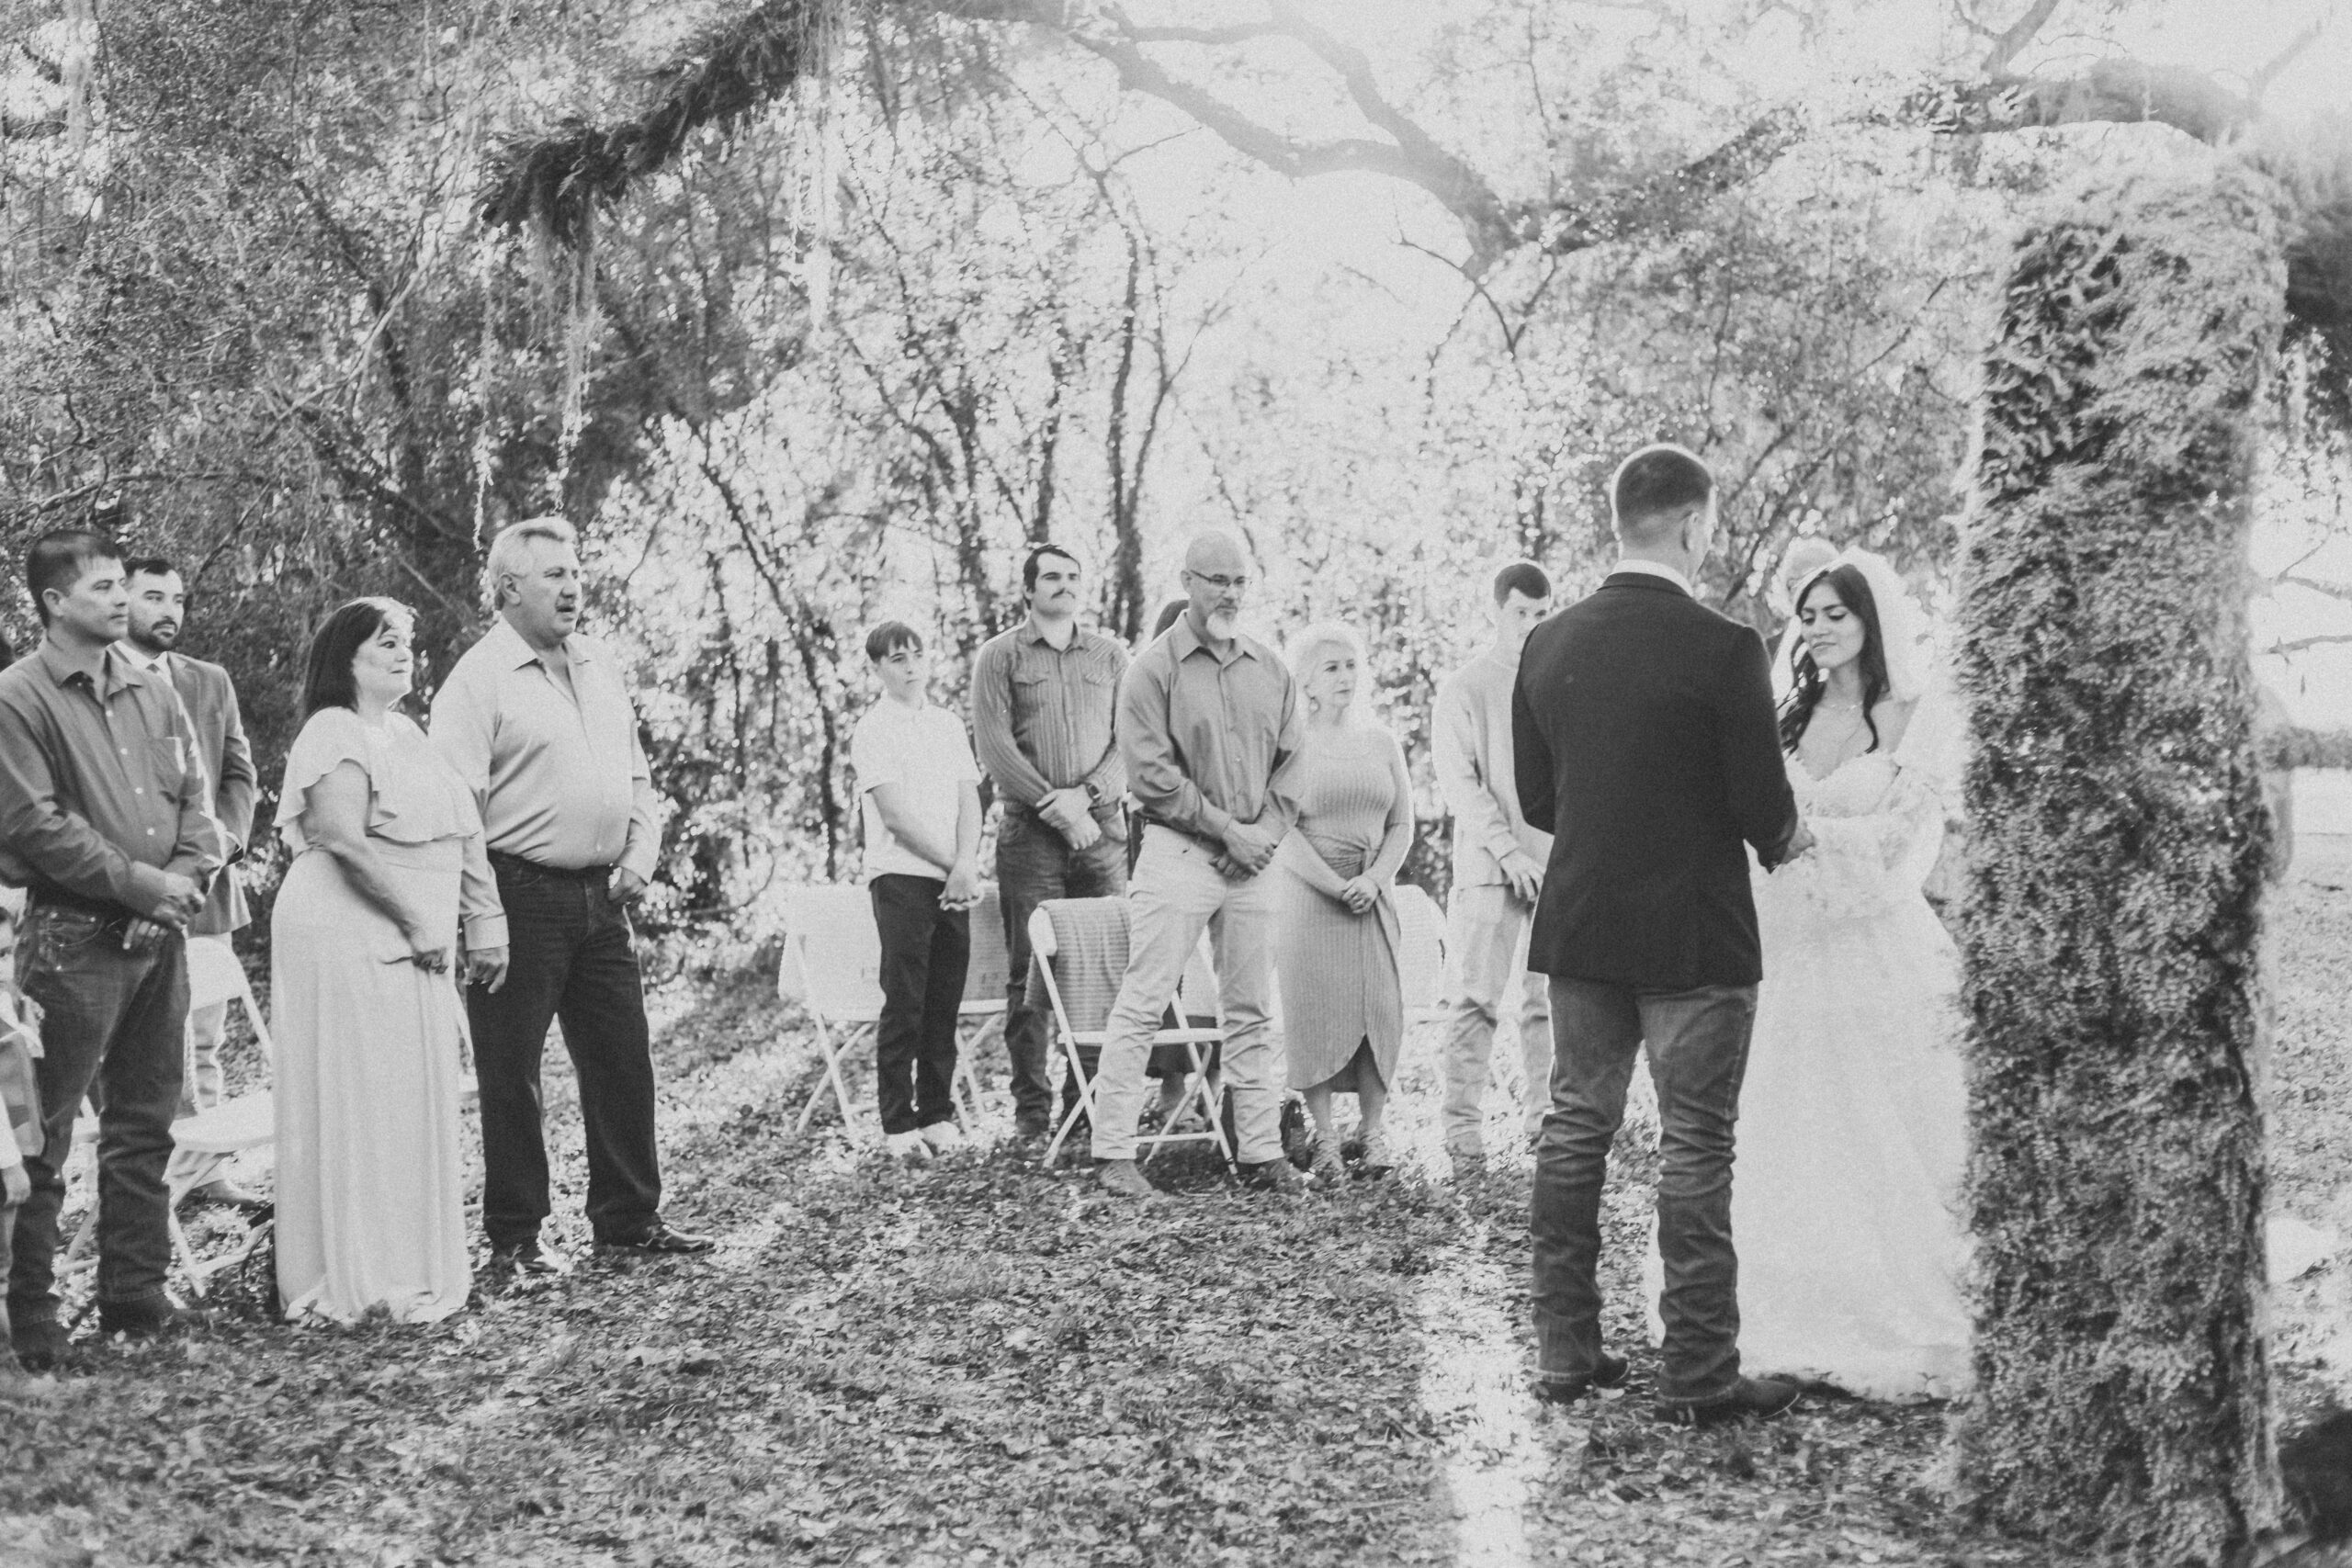 black and white image of micro wedding in houston. Bride and groom stand at alter of intimate wedding ceremony.